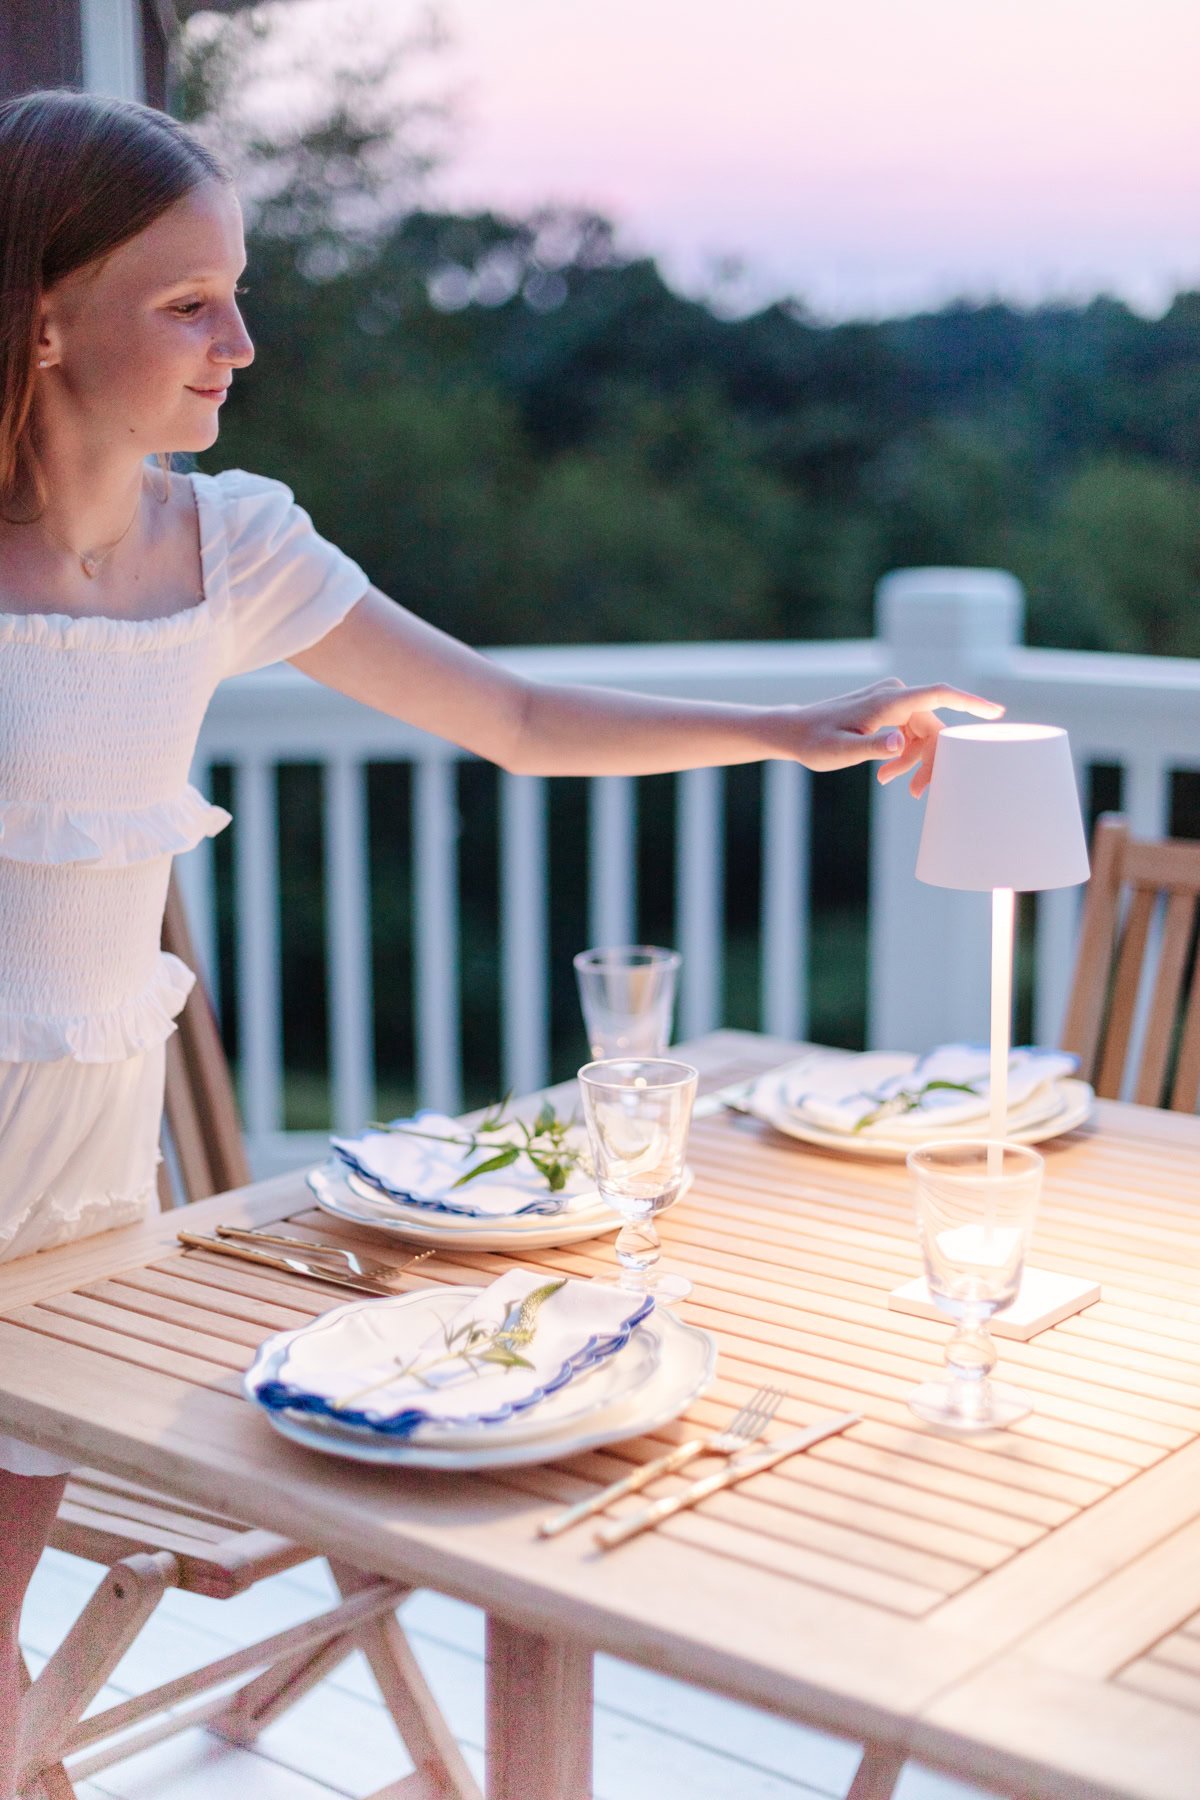 A girl in a white dress adjusts a lamp on a wooden outdoor dining table set with plates, glasses, and cutlery at sunset.